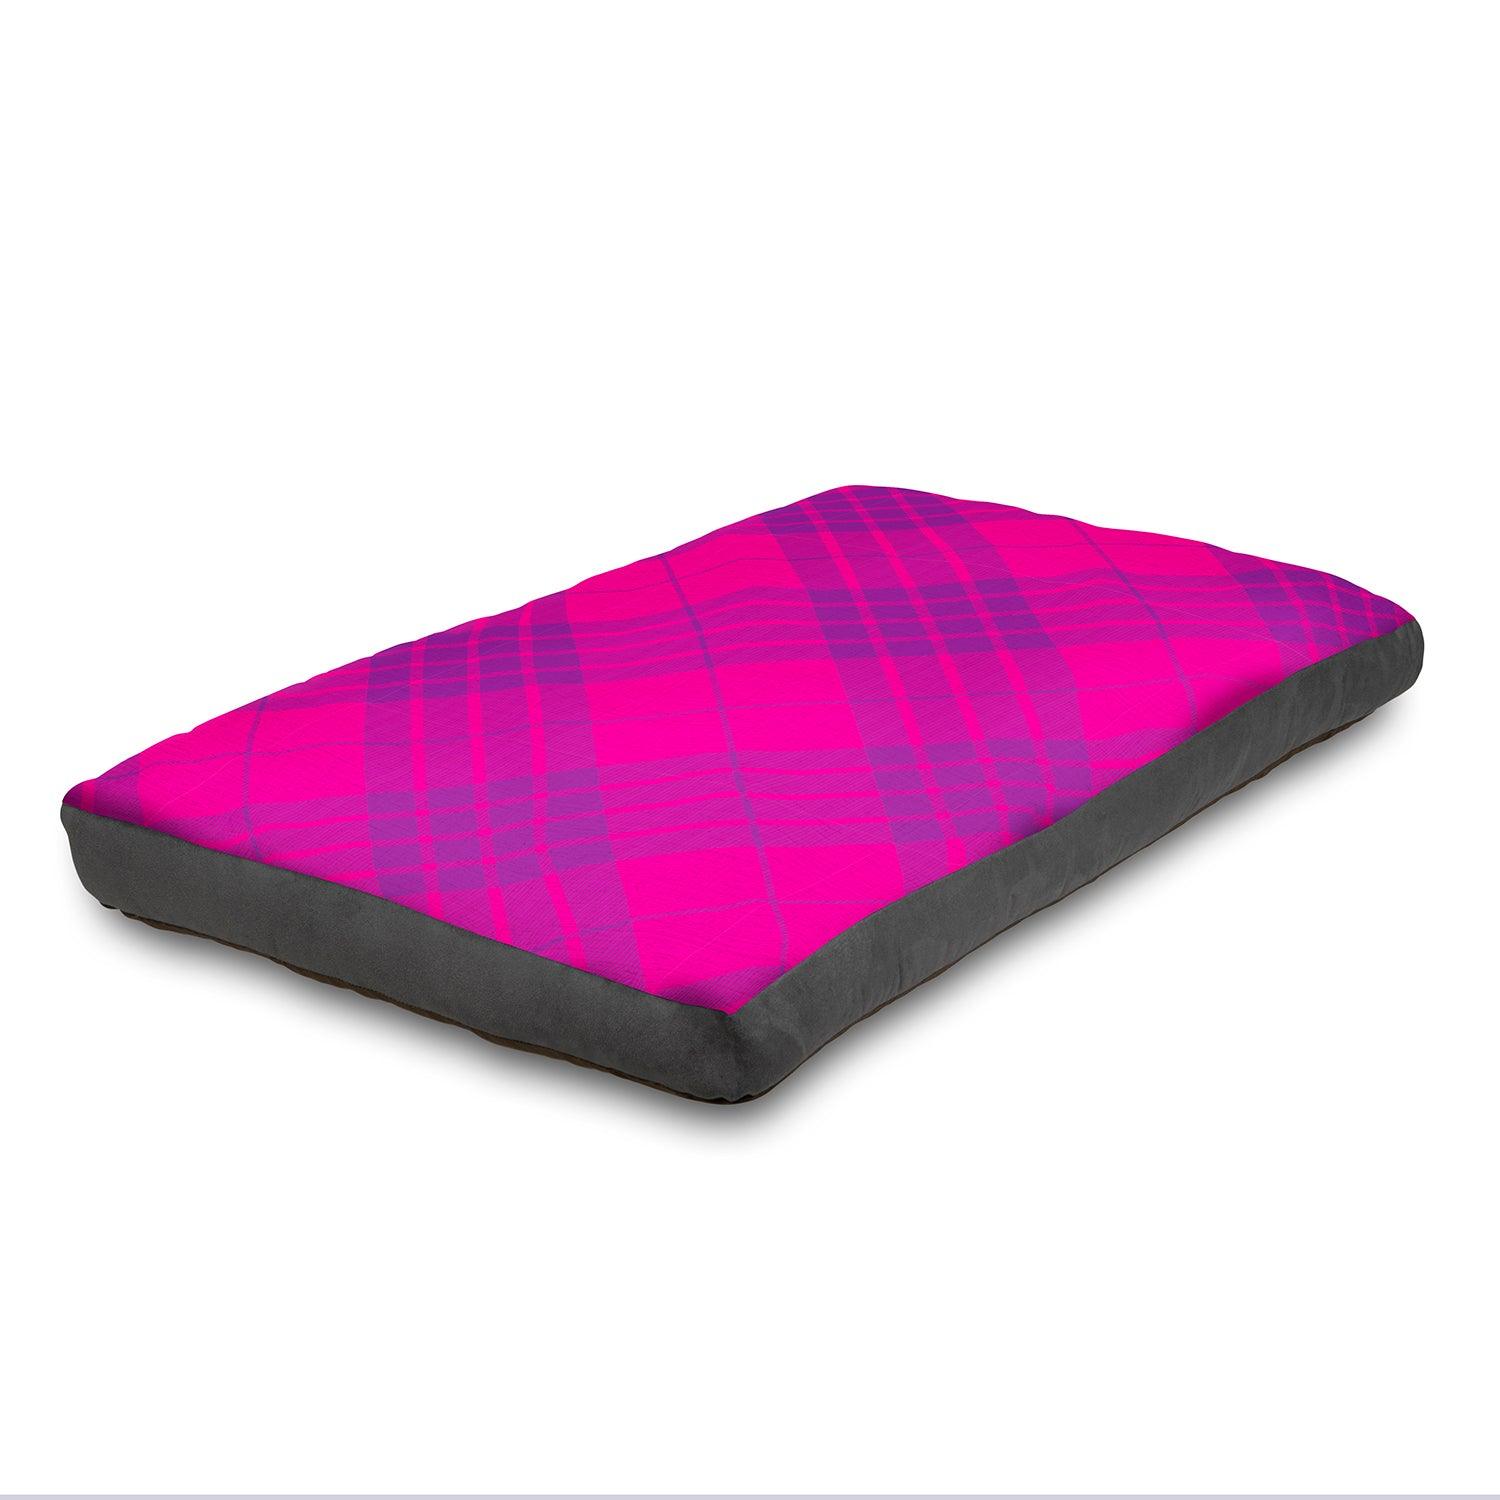 View Super Comfy Dog Bed Soft and Fluffy with Washable Cover Small 75 x 50 cm Pink information